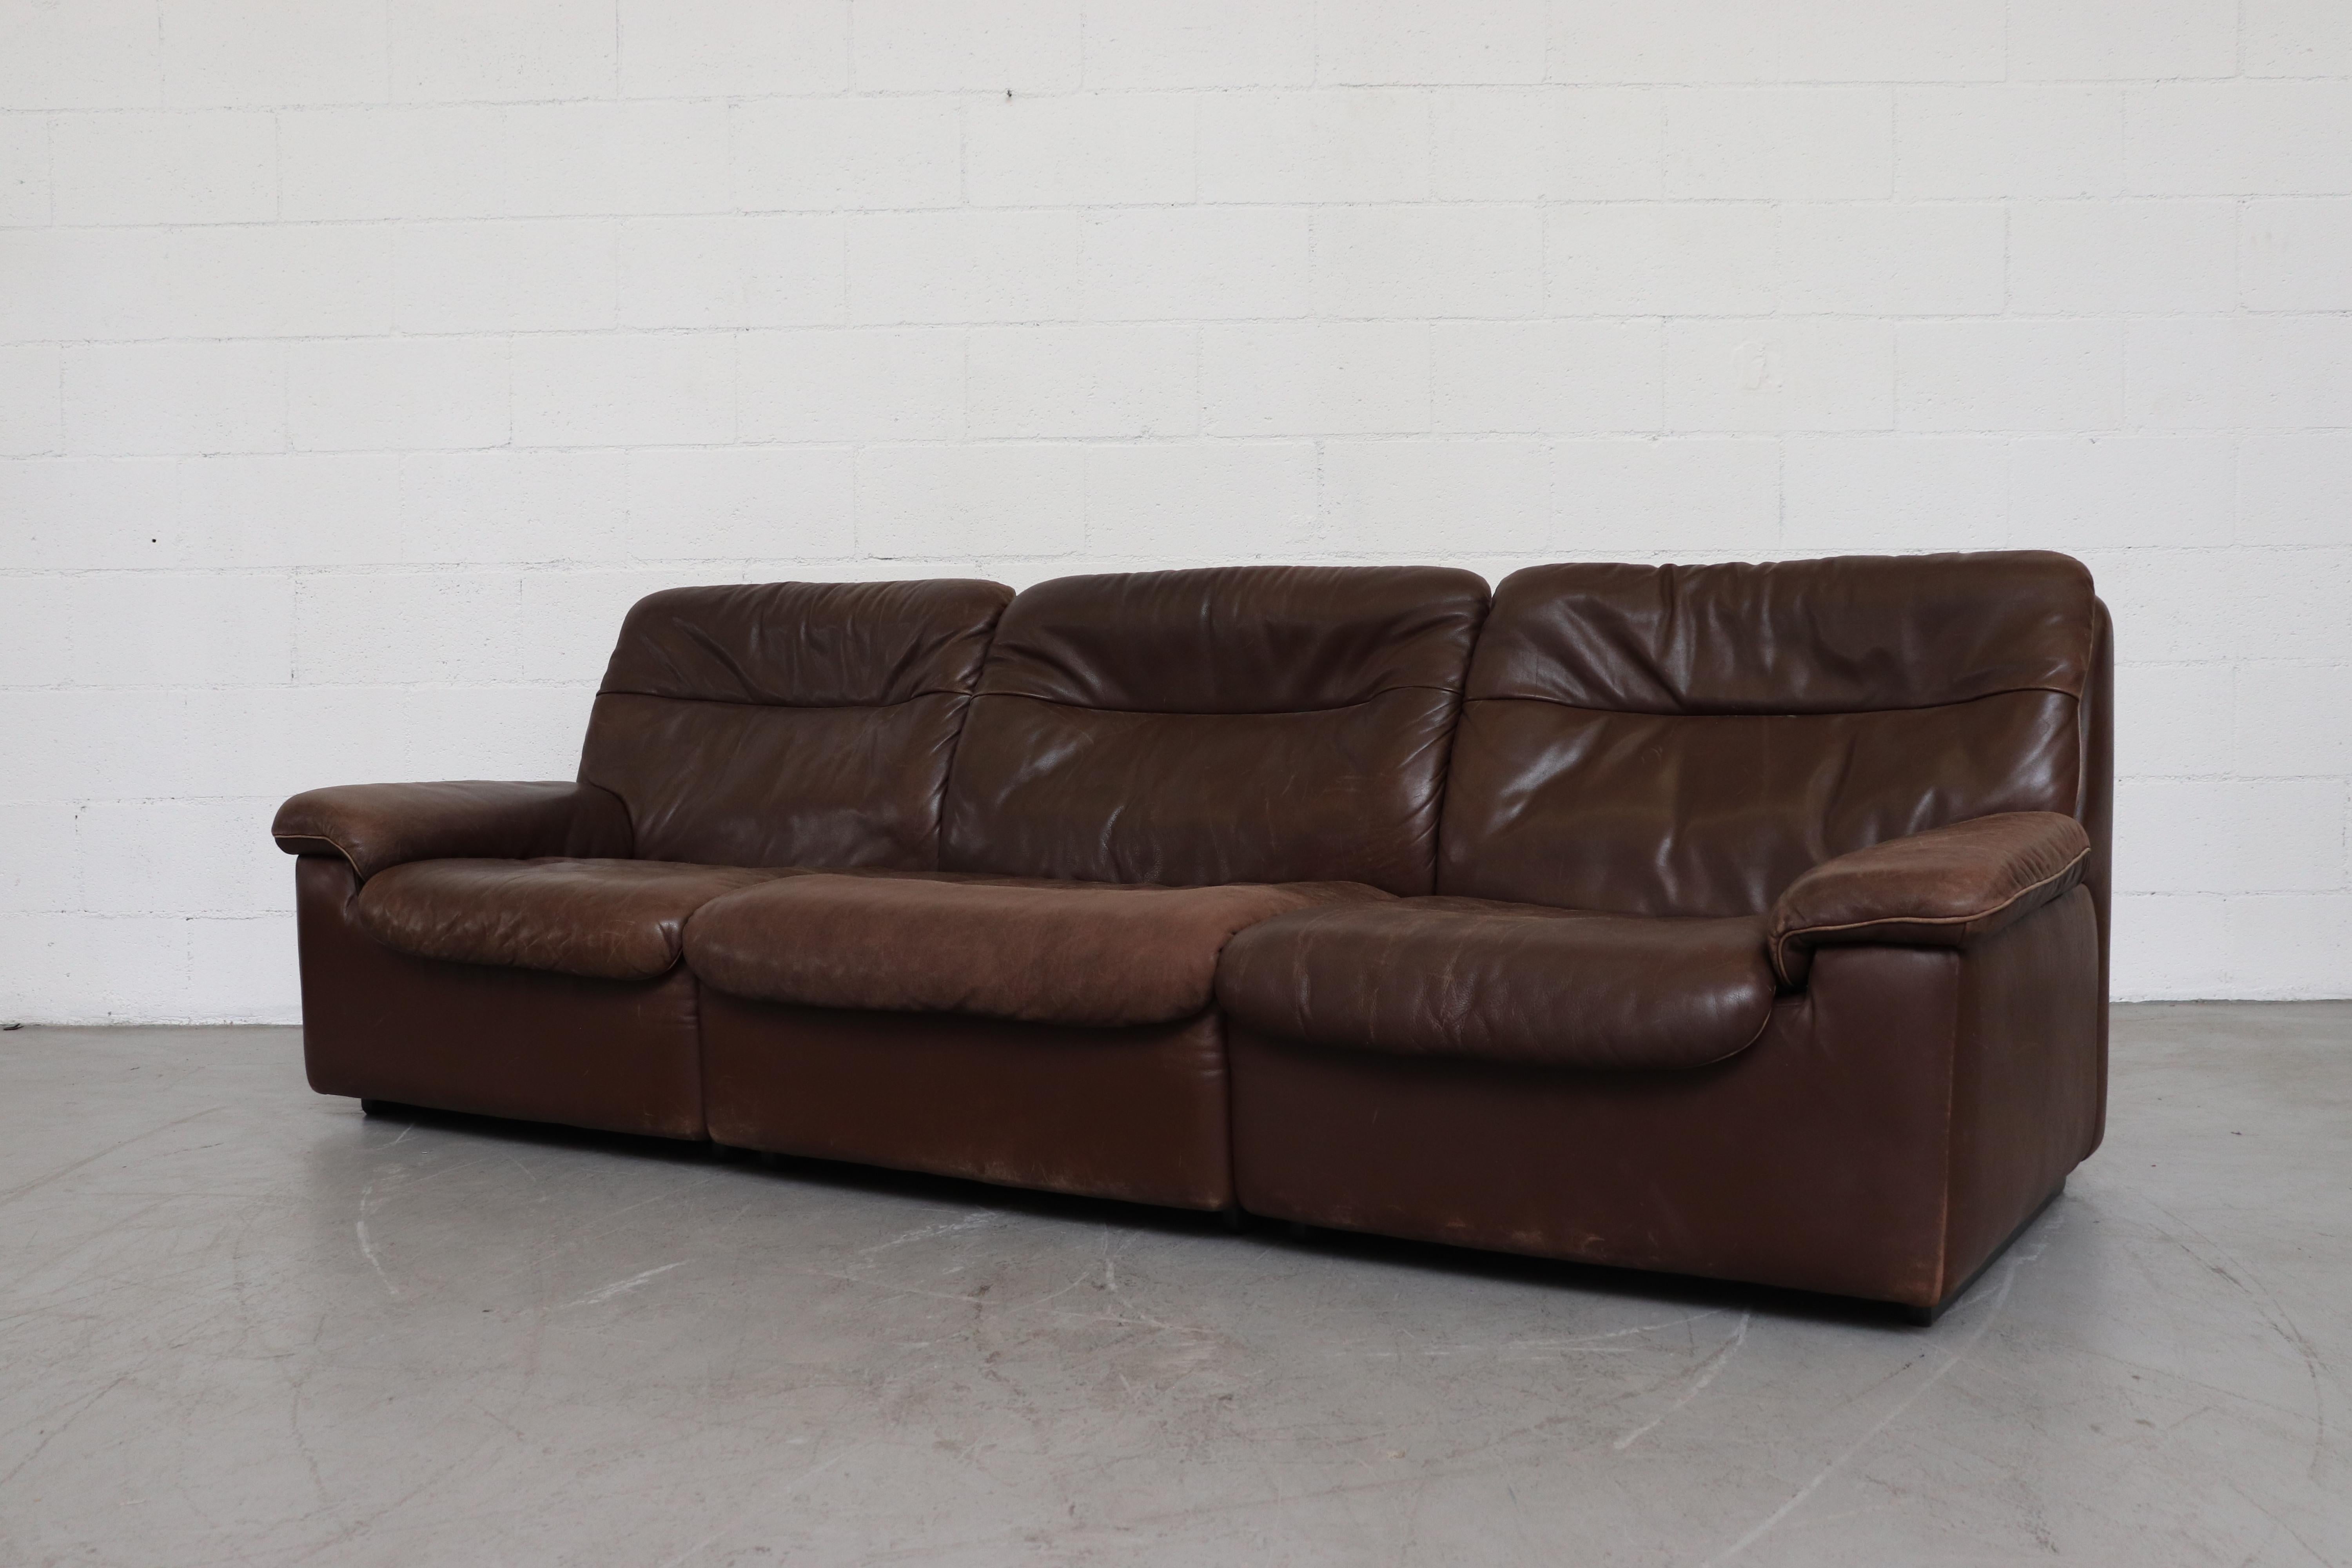 Thick chocolate brown leather 3-seat sofa in good original condition with nice patina and visible wear. A Matching Love Seat is also available and listed separately (LU922412766932)